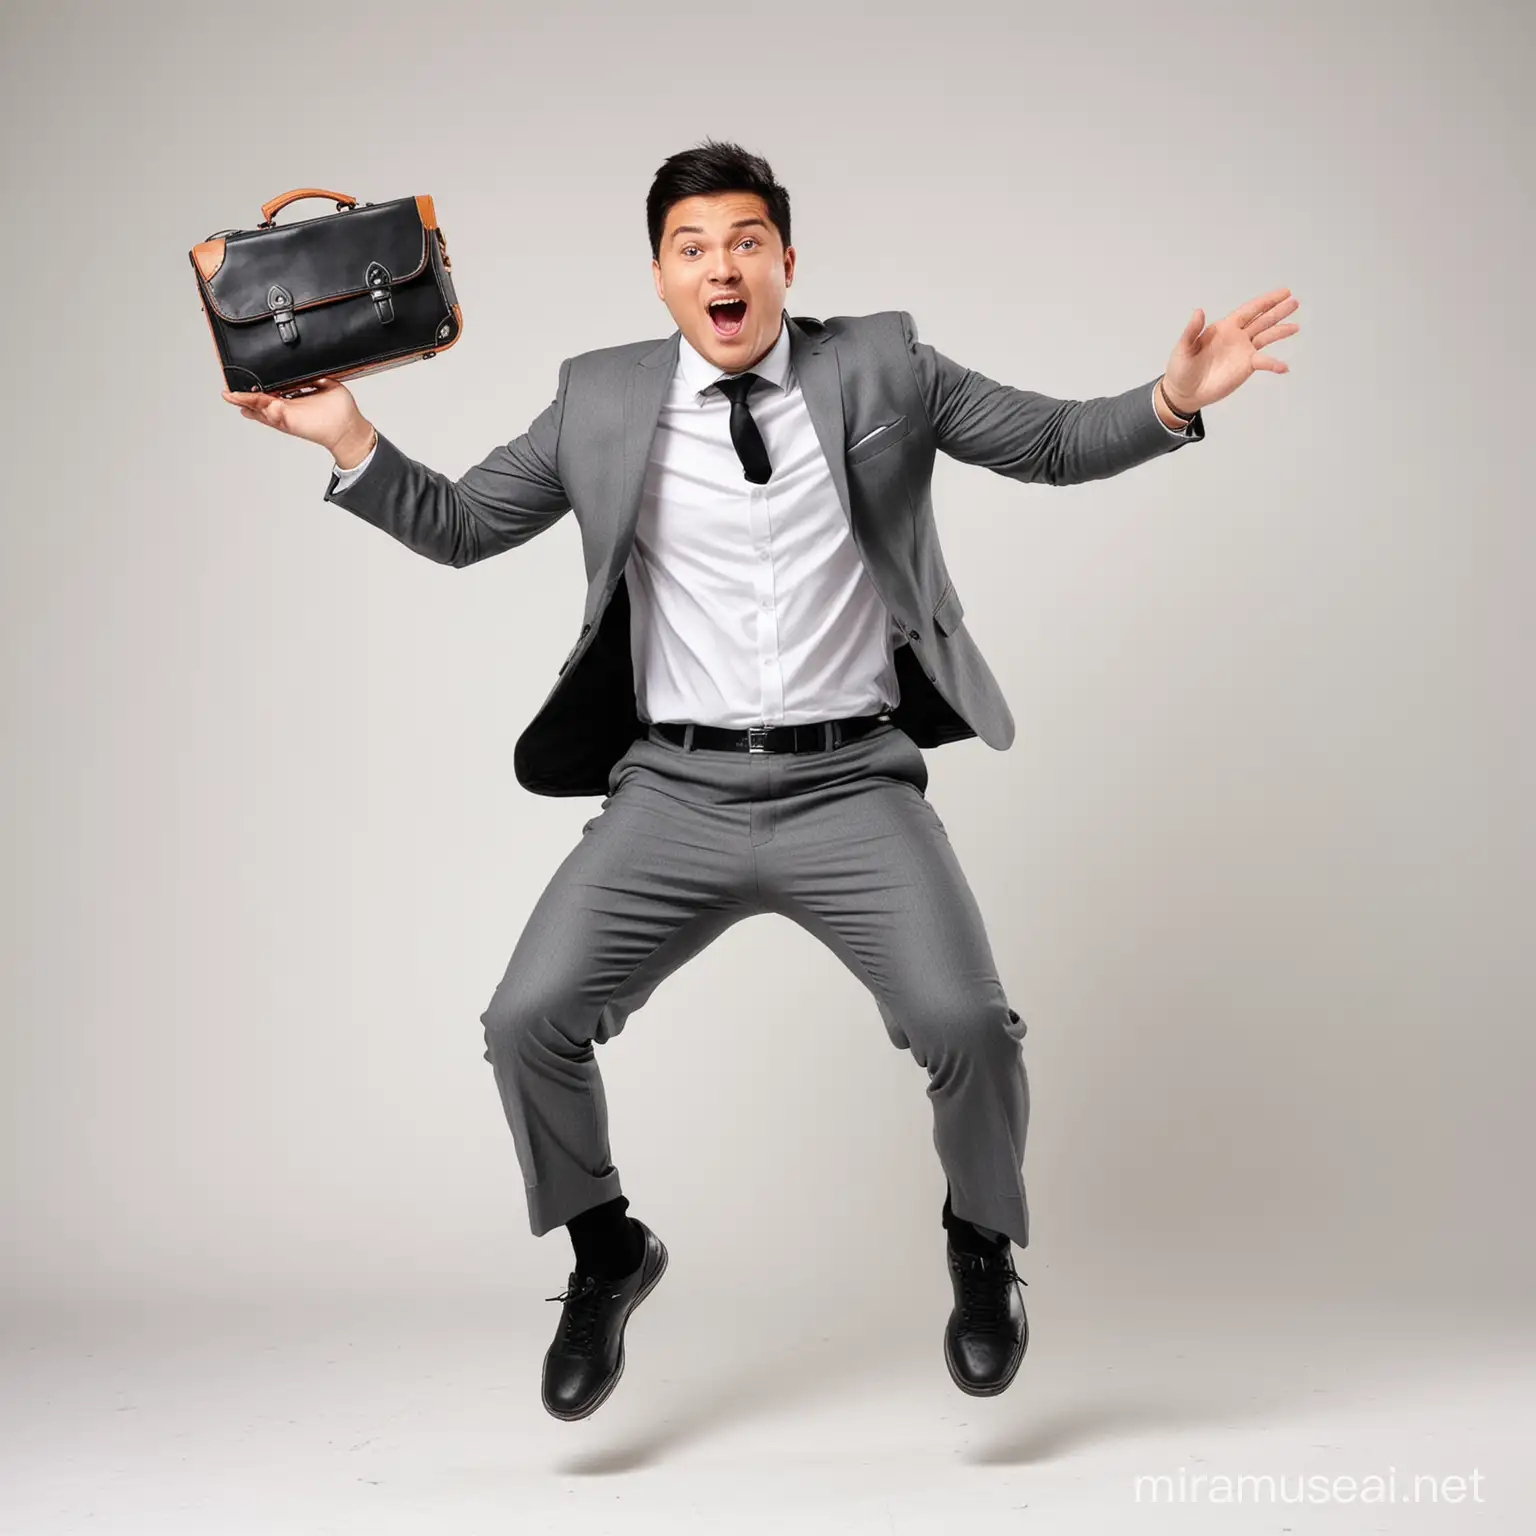 a man fun chubby face,tubuh pendek,short hair and black hair,caucasian man jumping 
with small orange briefcase in his hand, he has a suit and black sport shoes on white background